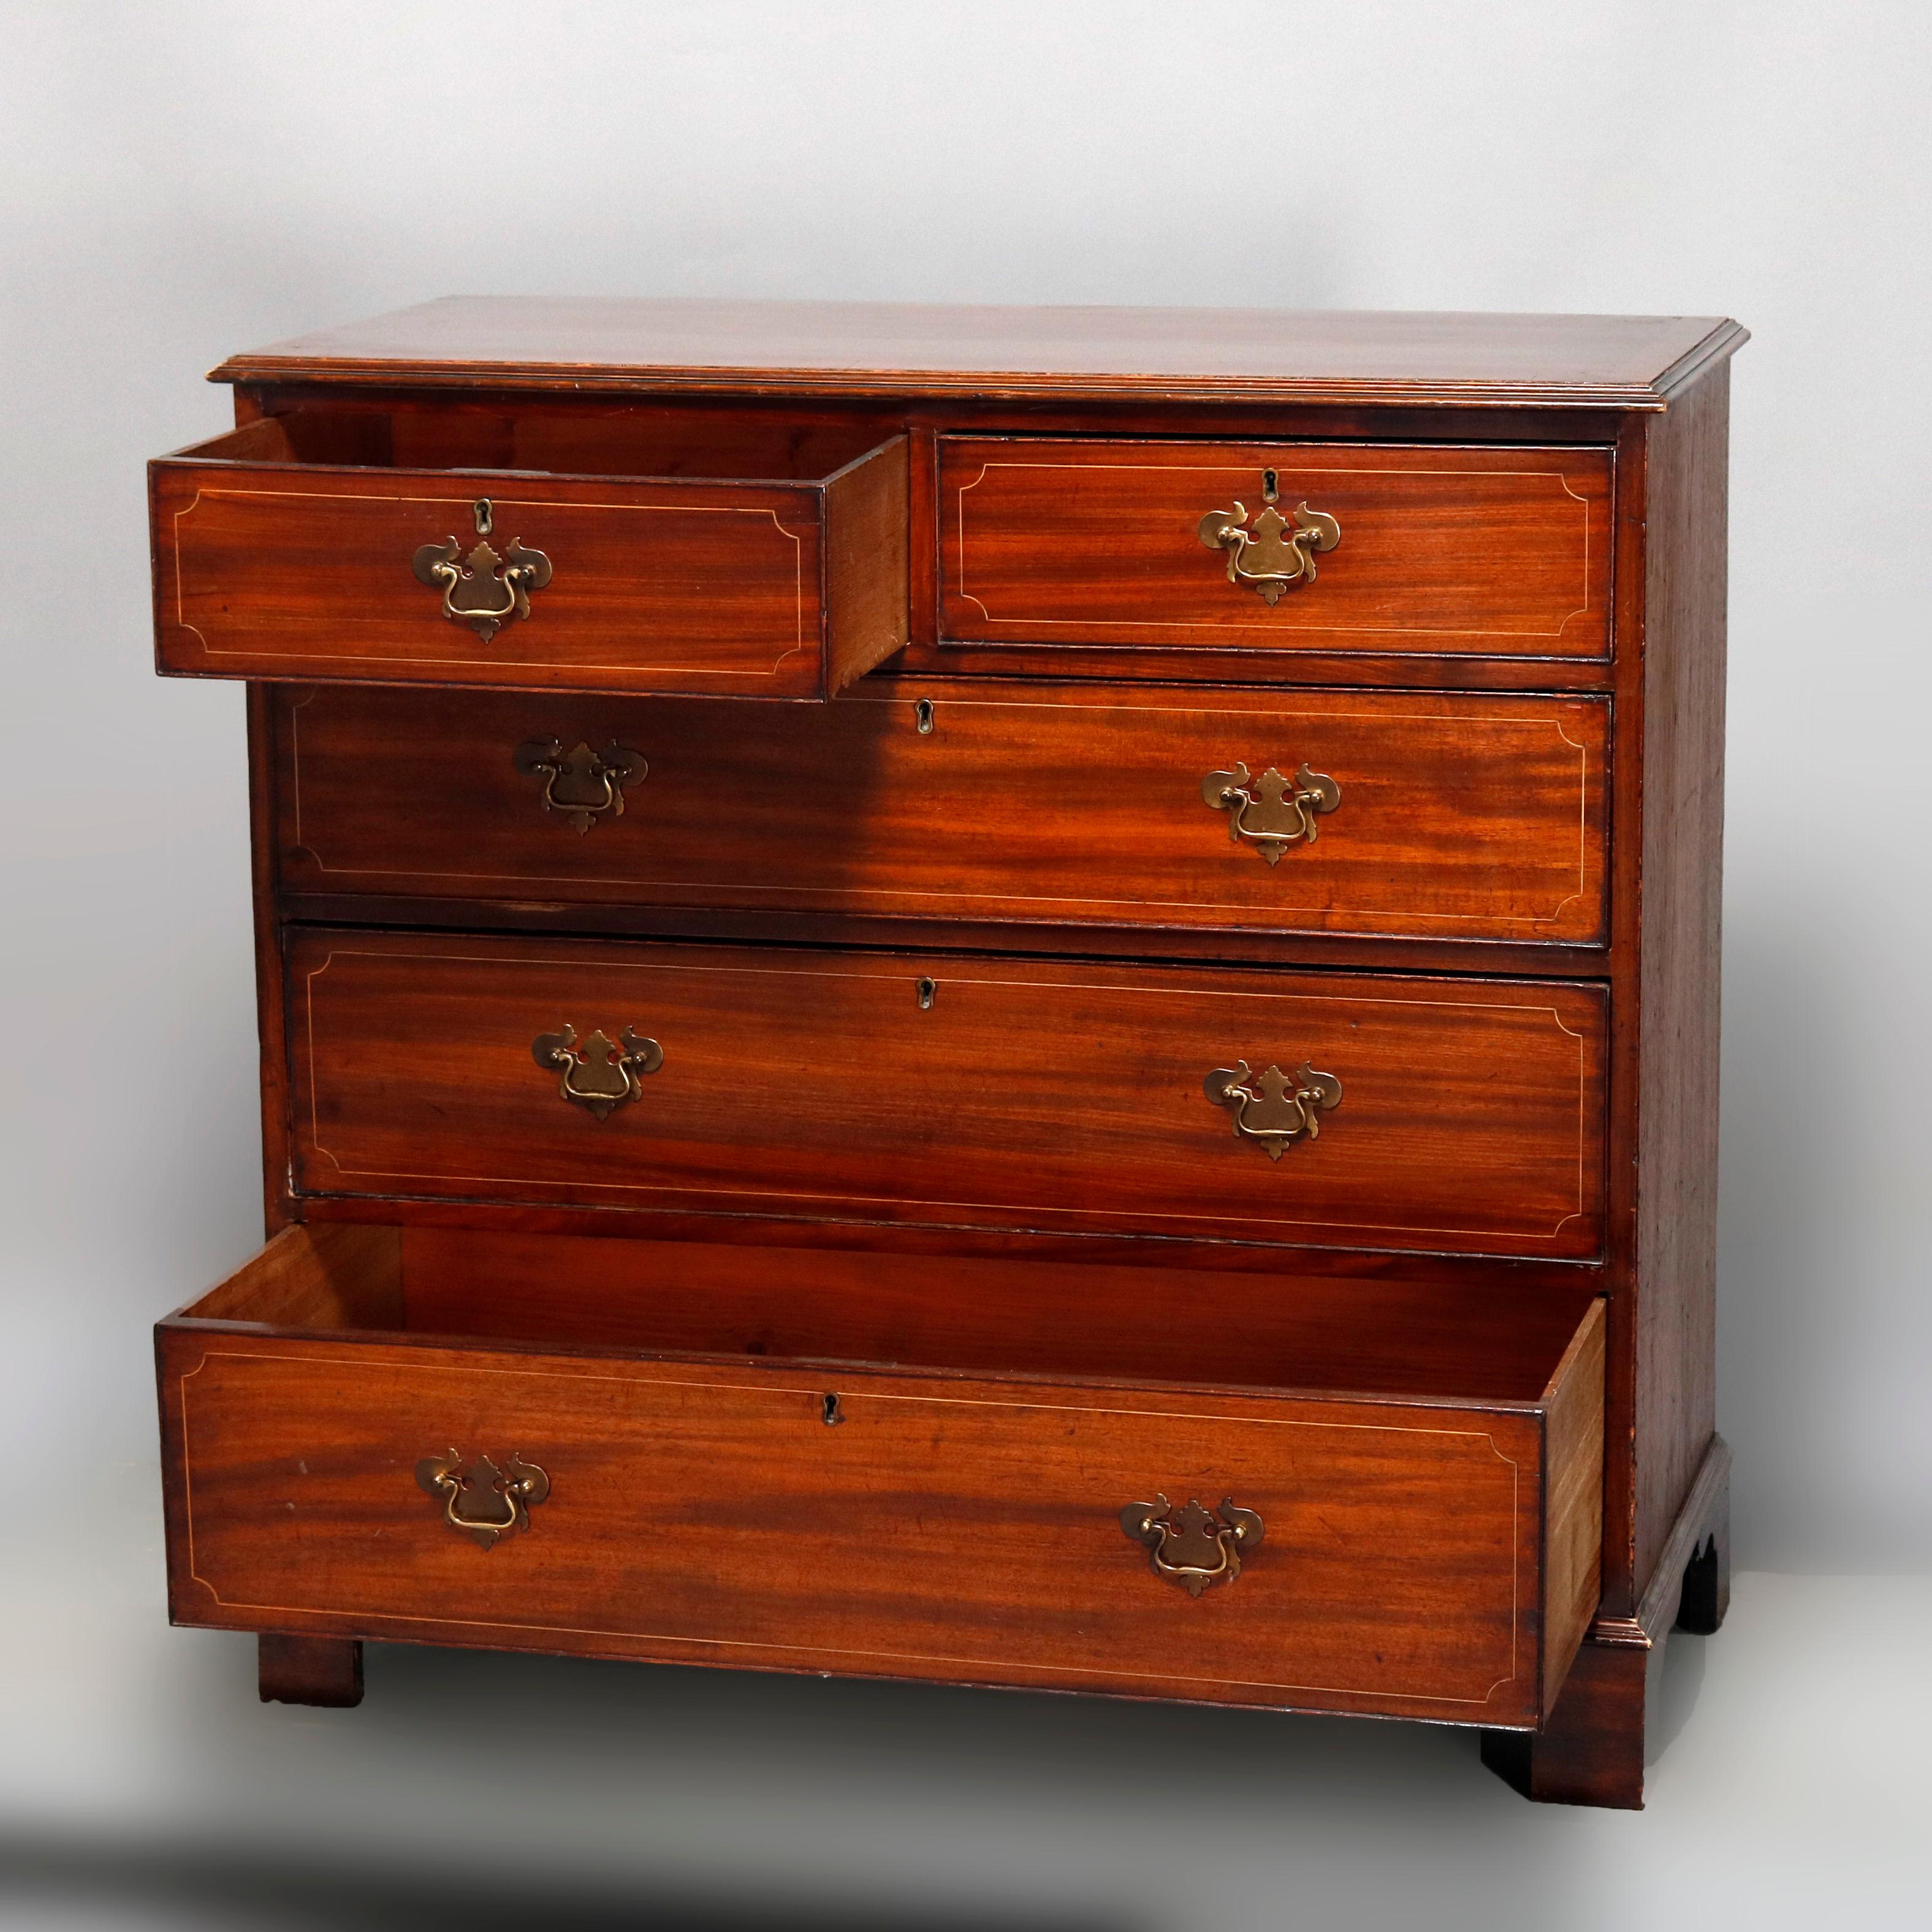 An antique English Georgian chest of drawers offers construction with deeply striated mahogany case having two smaller upper drawers over three long drawers, satinwood inlaid banding throughout and raised on bracket feet, 19th century

Measures: